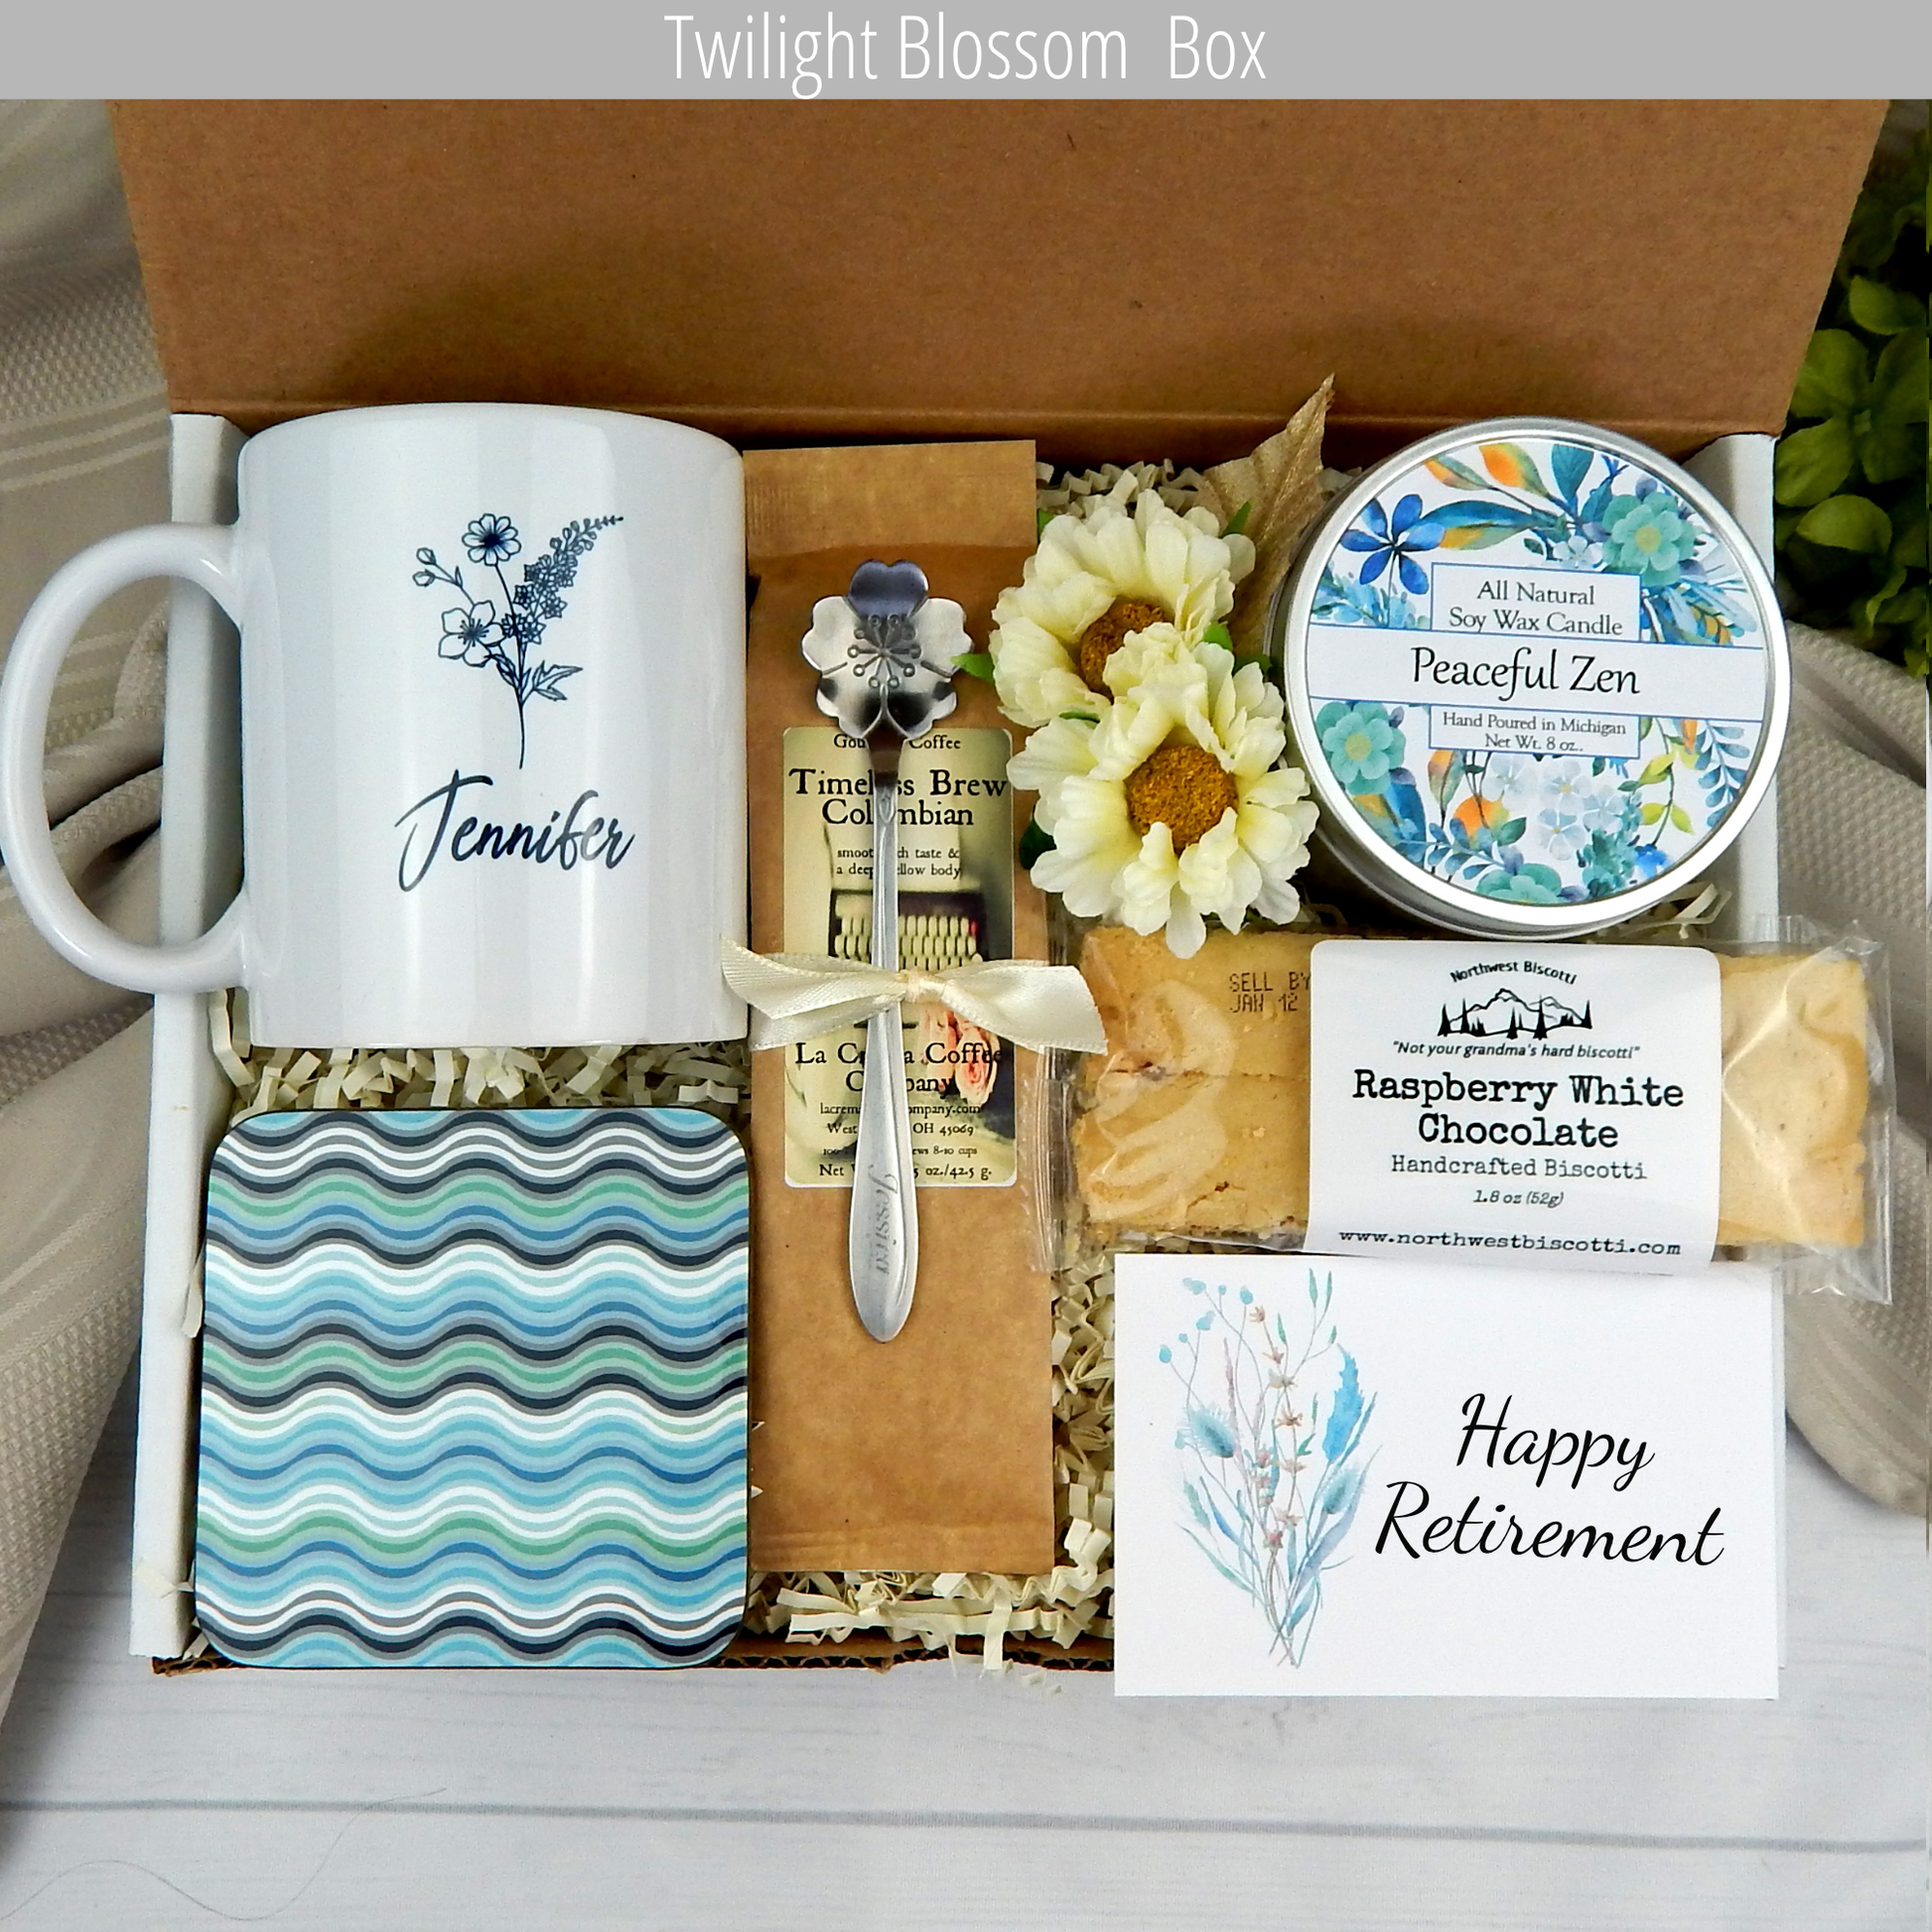 Cheers to retirement: Encouragement gift basket with a custom mug, coffee, and scrumptious goodies for her new adventure.